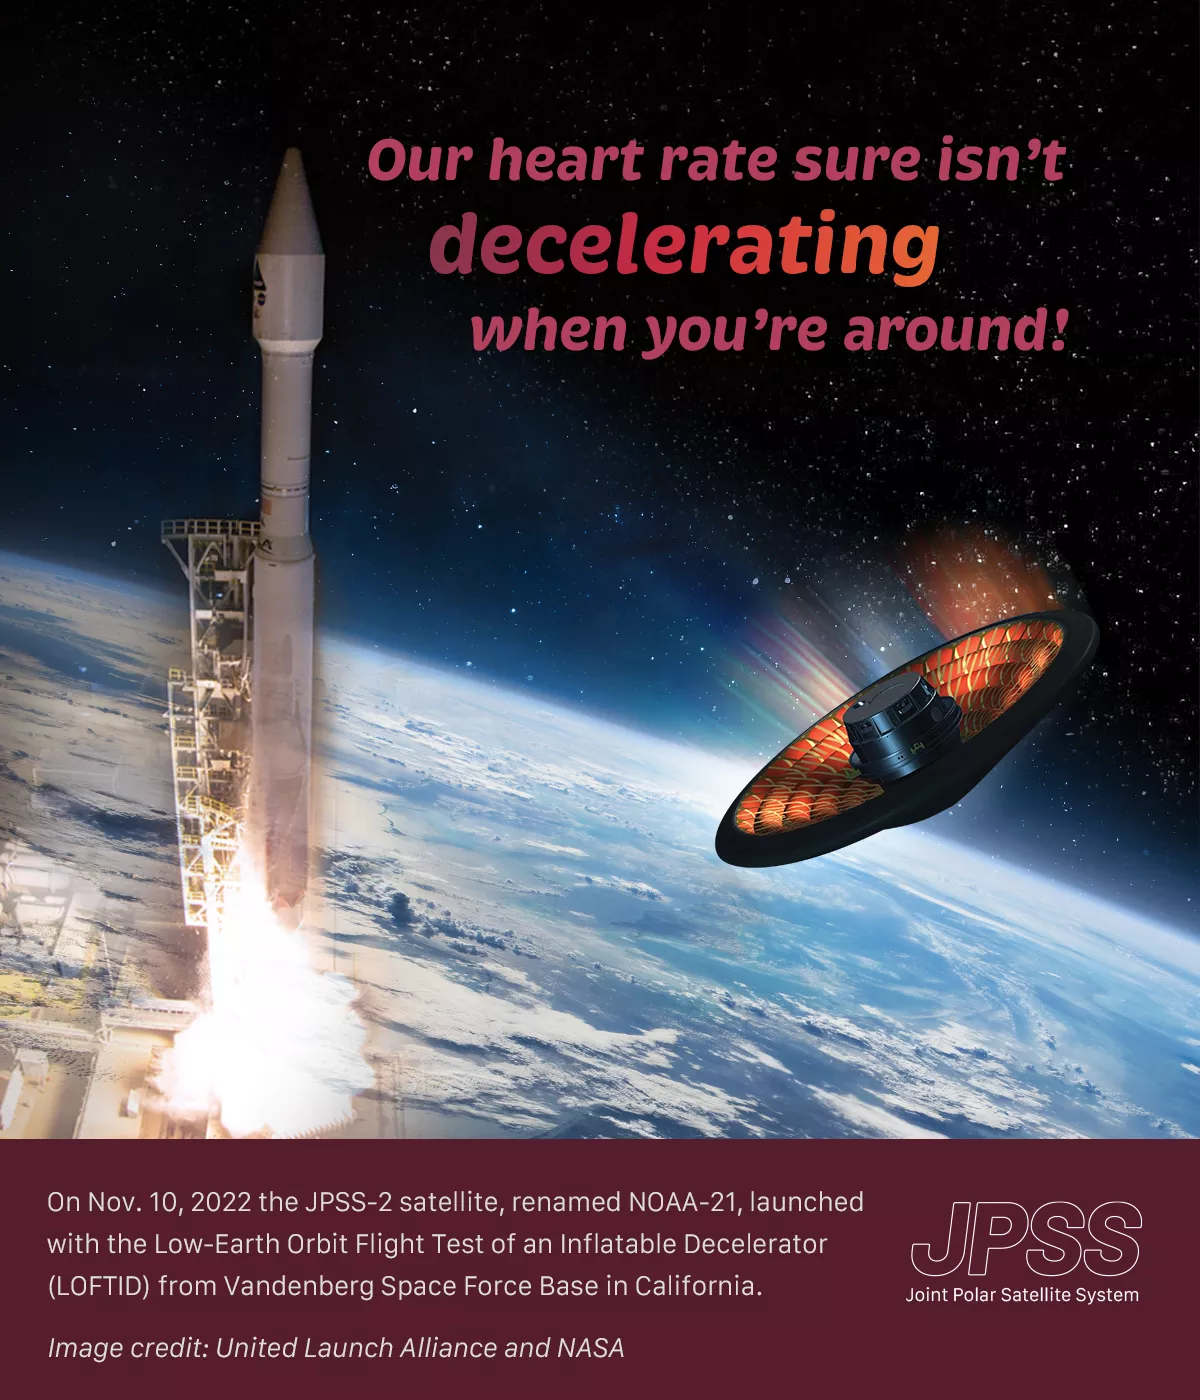 Composite illustration of a rocket launching into space, and a spacecraft falling to Earth. Text reads, "Our heart rate sure isn't decelerating when you're around! On Nov. 10, 2022 the JPSS-2 satellite, renamed NOAA-21, launched with the Low-Earth Orbit Flight Test of an Inflatable Decelerator (LOFTID) from Vandenberg Space Force Base in California."